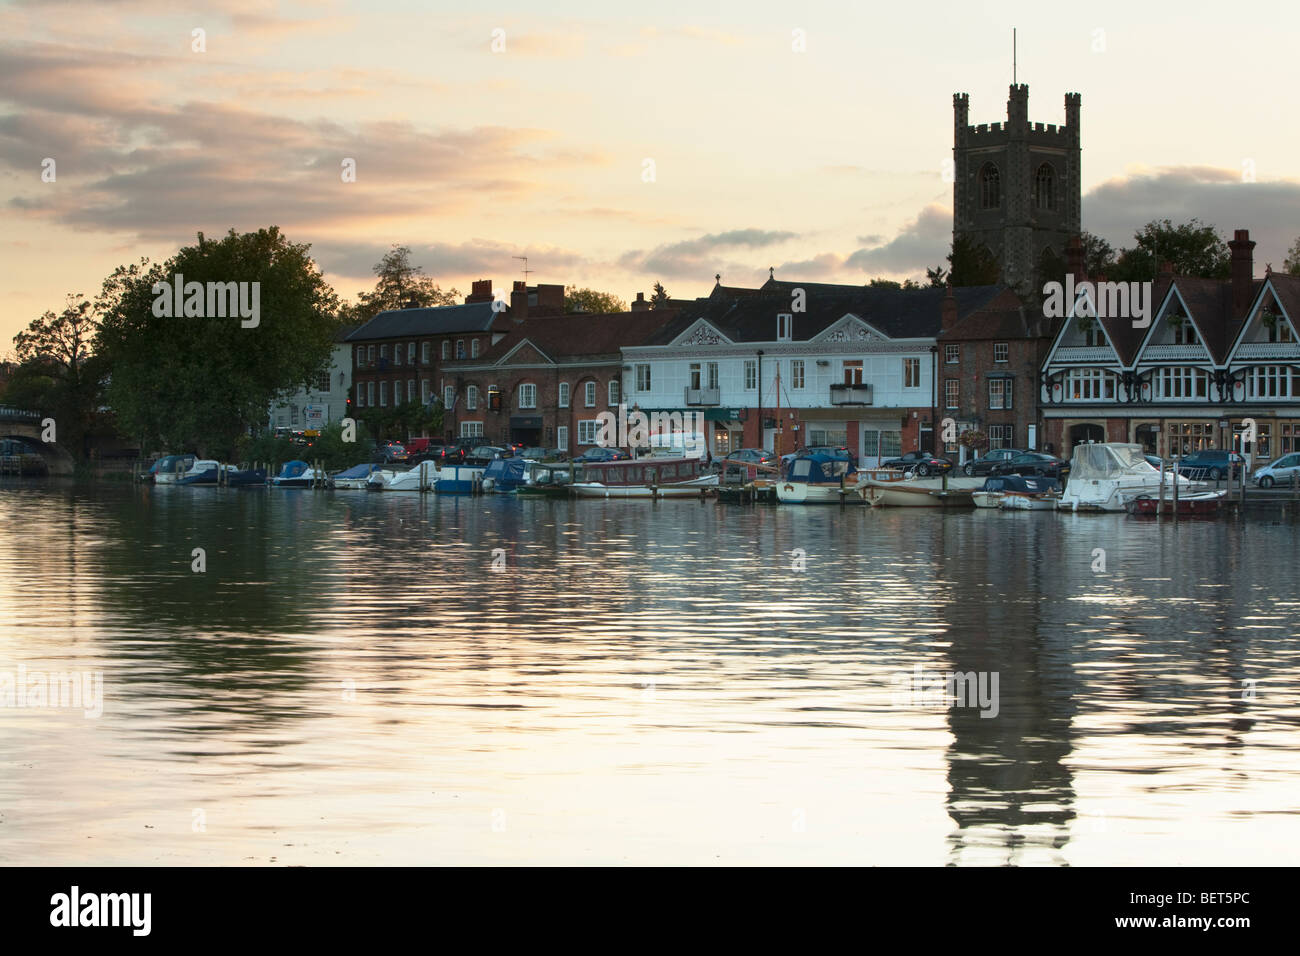 Page 3 - River Bank With Boat Moorings High Resolution Stock Photography  and Images - Alamy